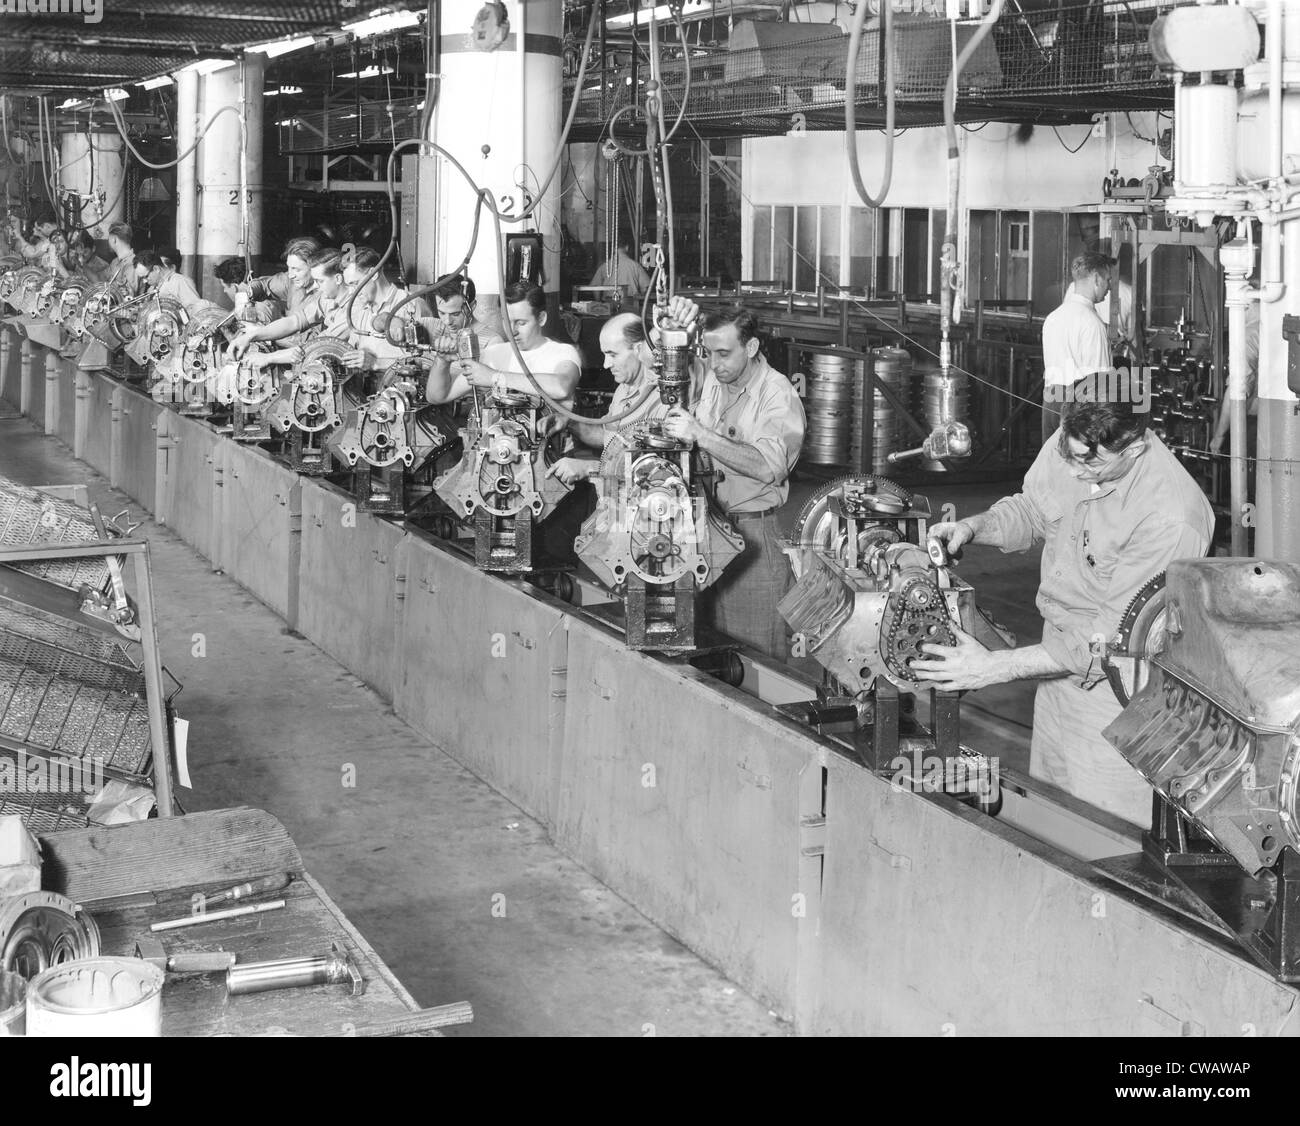 Cadillac assembly line, at their car manufacturing plant, Detroit, Michigan, November 23, 1954. Courtesy: CSU Archives/Everett Stock Photo